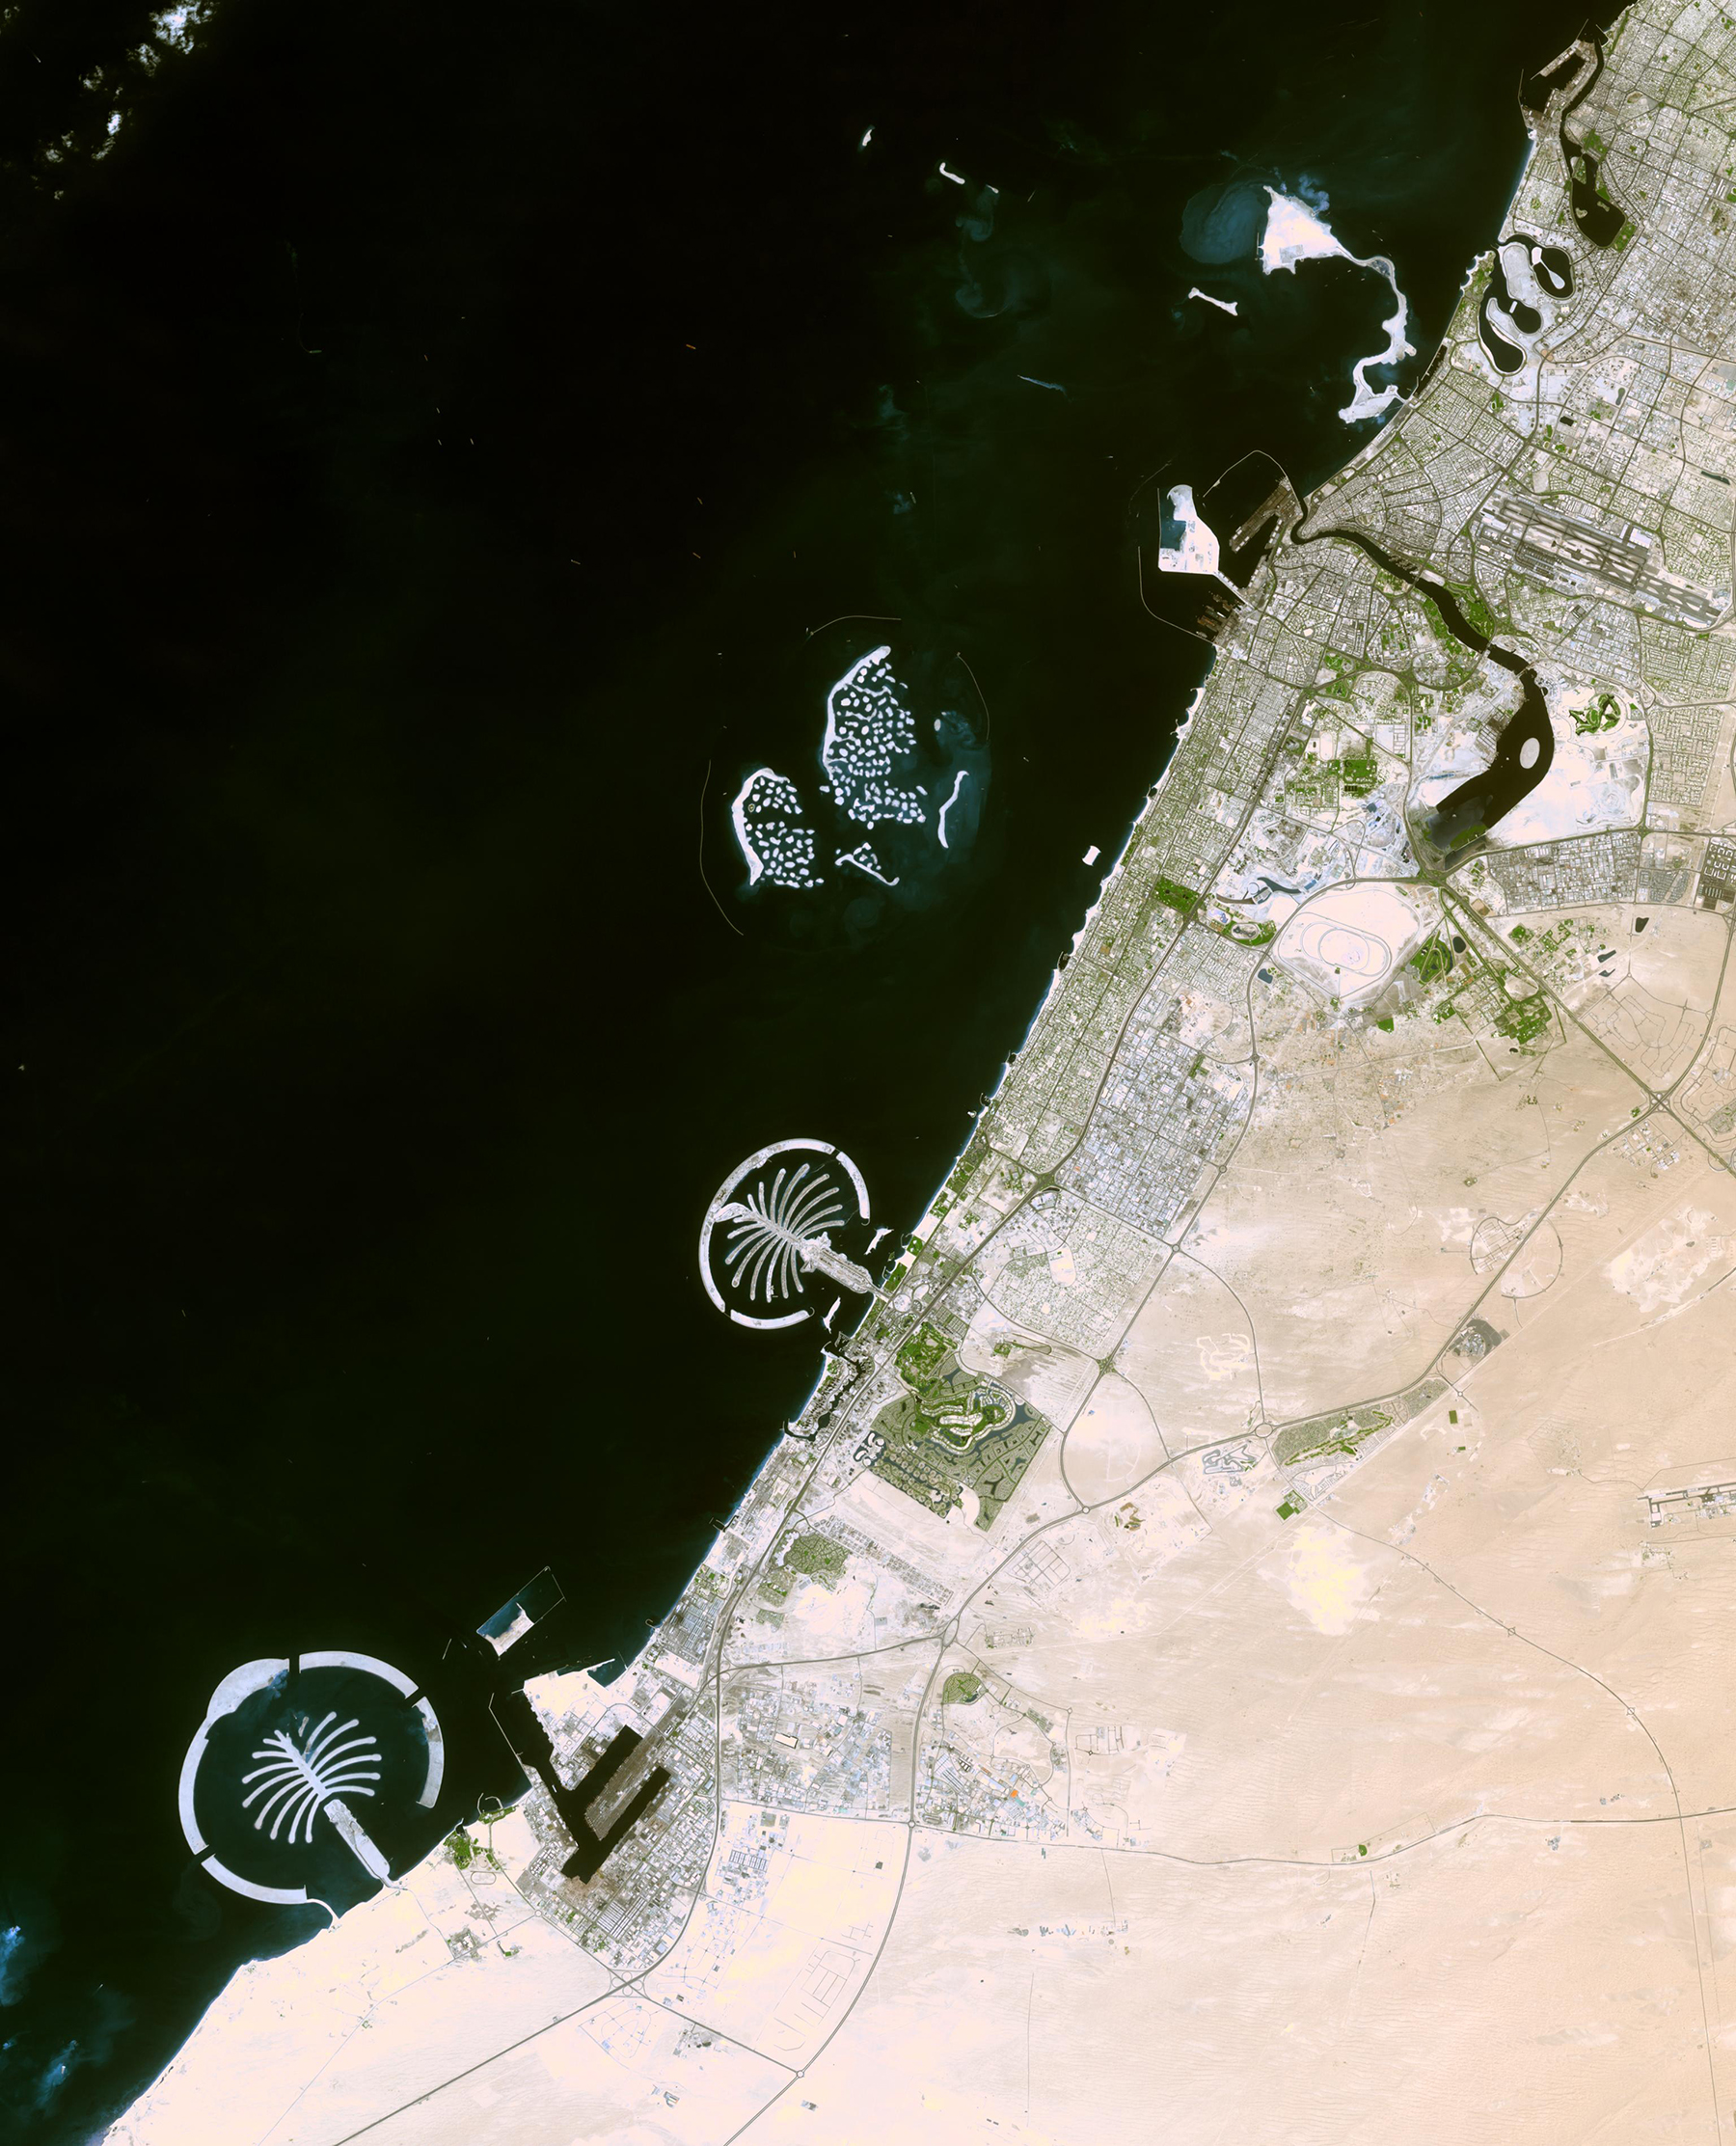 Creation of human-made islands like the Palm Islands along the coast of Dubai are driven by real estate markets. But land reclamation also occurs for industrial purposes like expanding ports or airports. All these projects require lots of sand to build and maintain the new land. (Image courtesy of NASA/GSFC/MITI/ERSDAC/JAROS, and U.S./Japan ASTER Science Team)